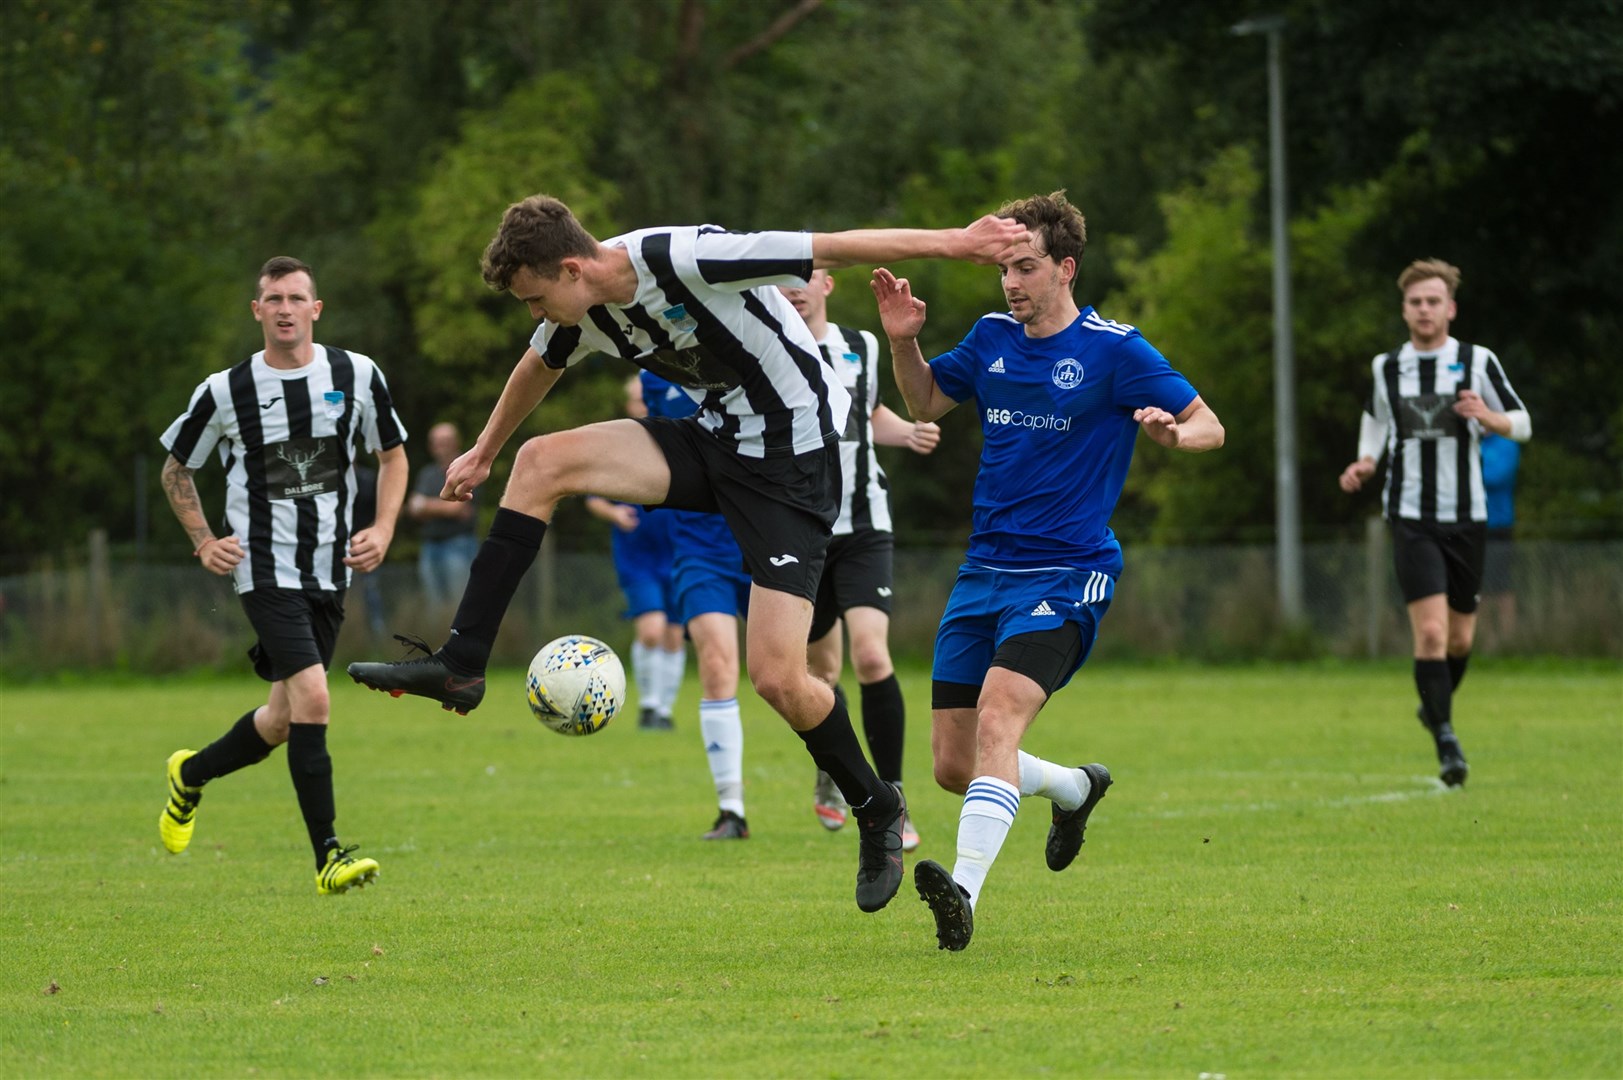 Alness United defender Gregor Patterson tries to clear the ball. Picture: Callum Mackay